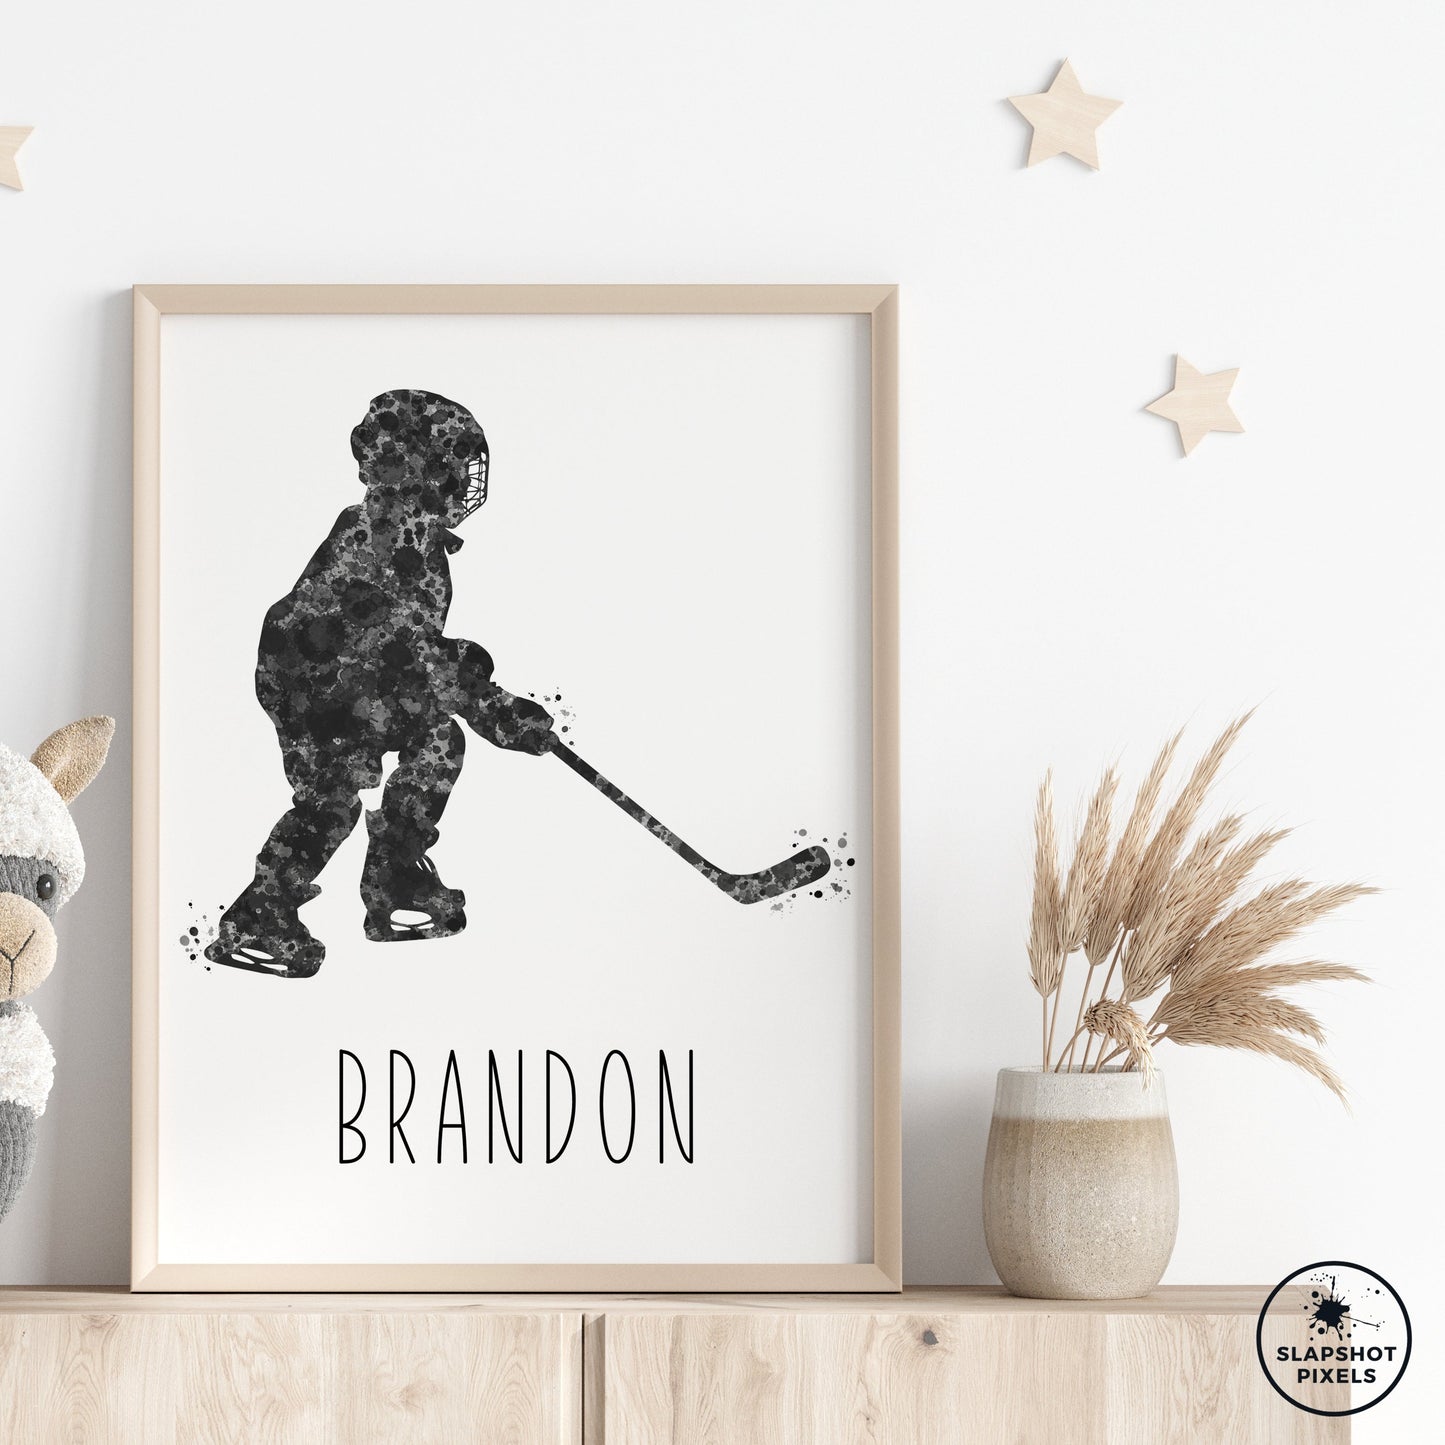 Personalized hockey poster of a child hockey player holding a hockey stick with custom name under the player. Designed in black and grey watercolor splatters. Perfect hockey gifts for boys, hockey team gifts, hockey coach gift, hockey wall art décor in a hockey bedroom and birthday gifts for hockey players.